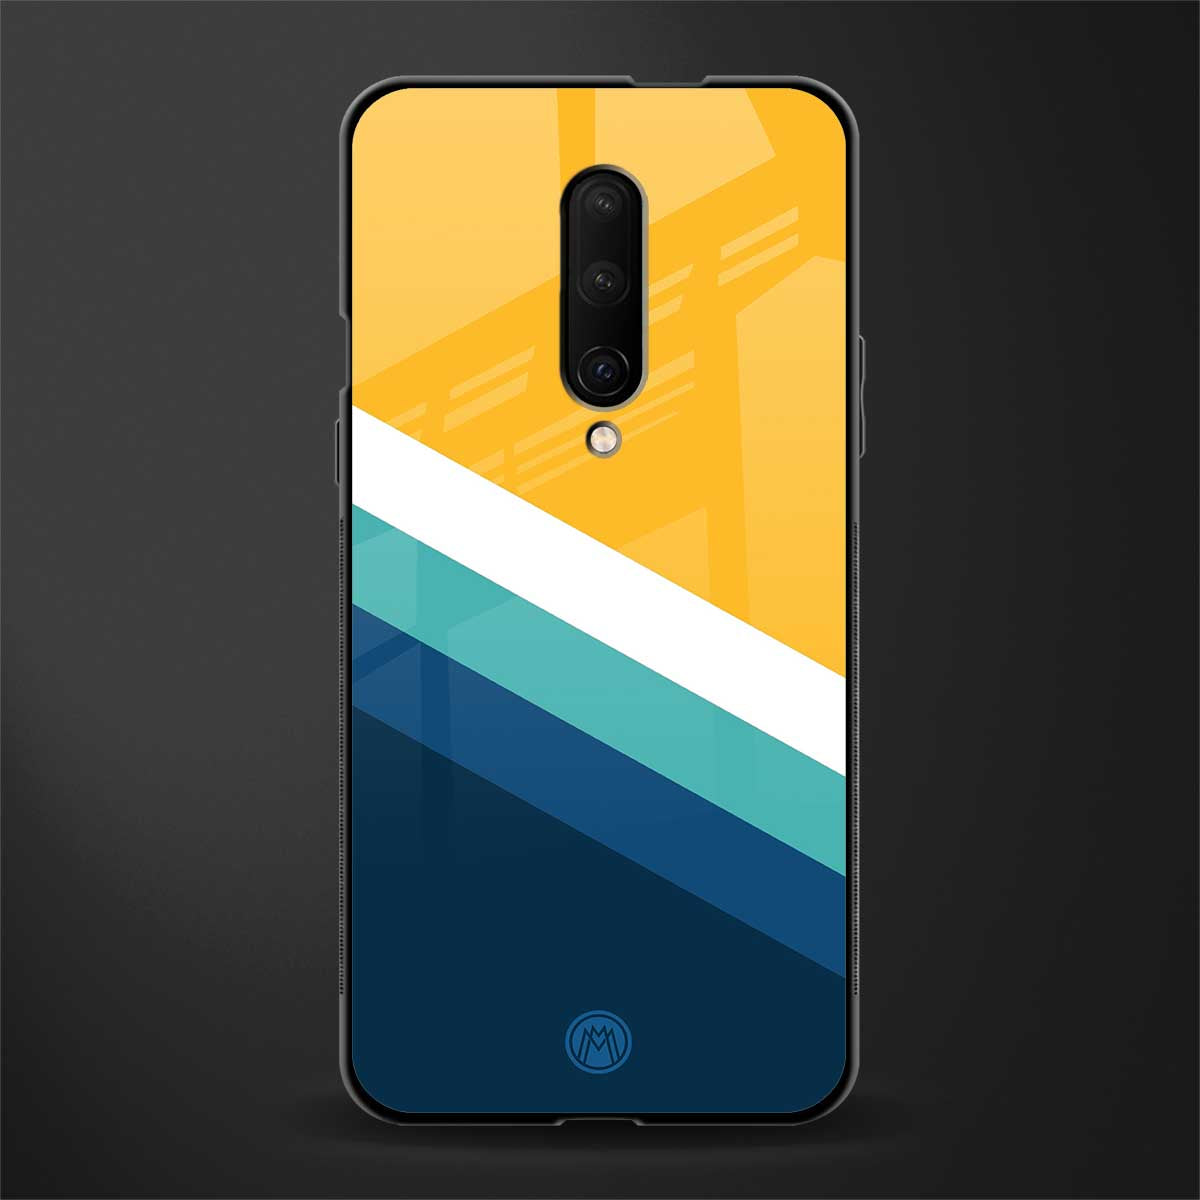 yellow white blue pattern stripes glass case for oneplus 7 pro image